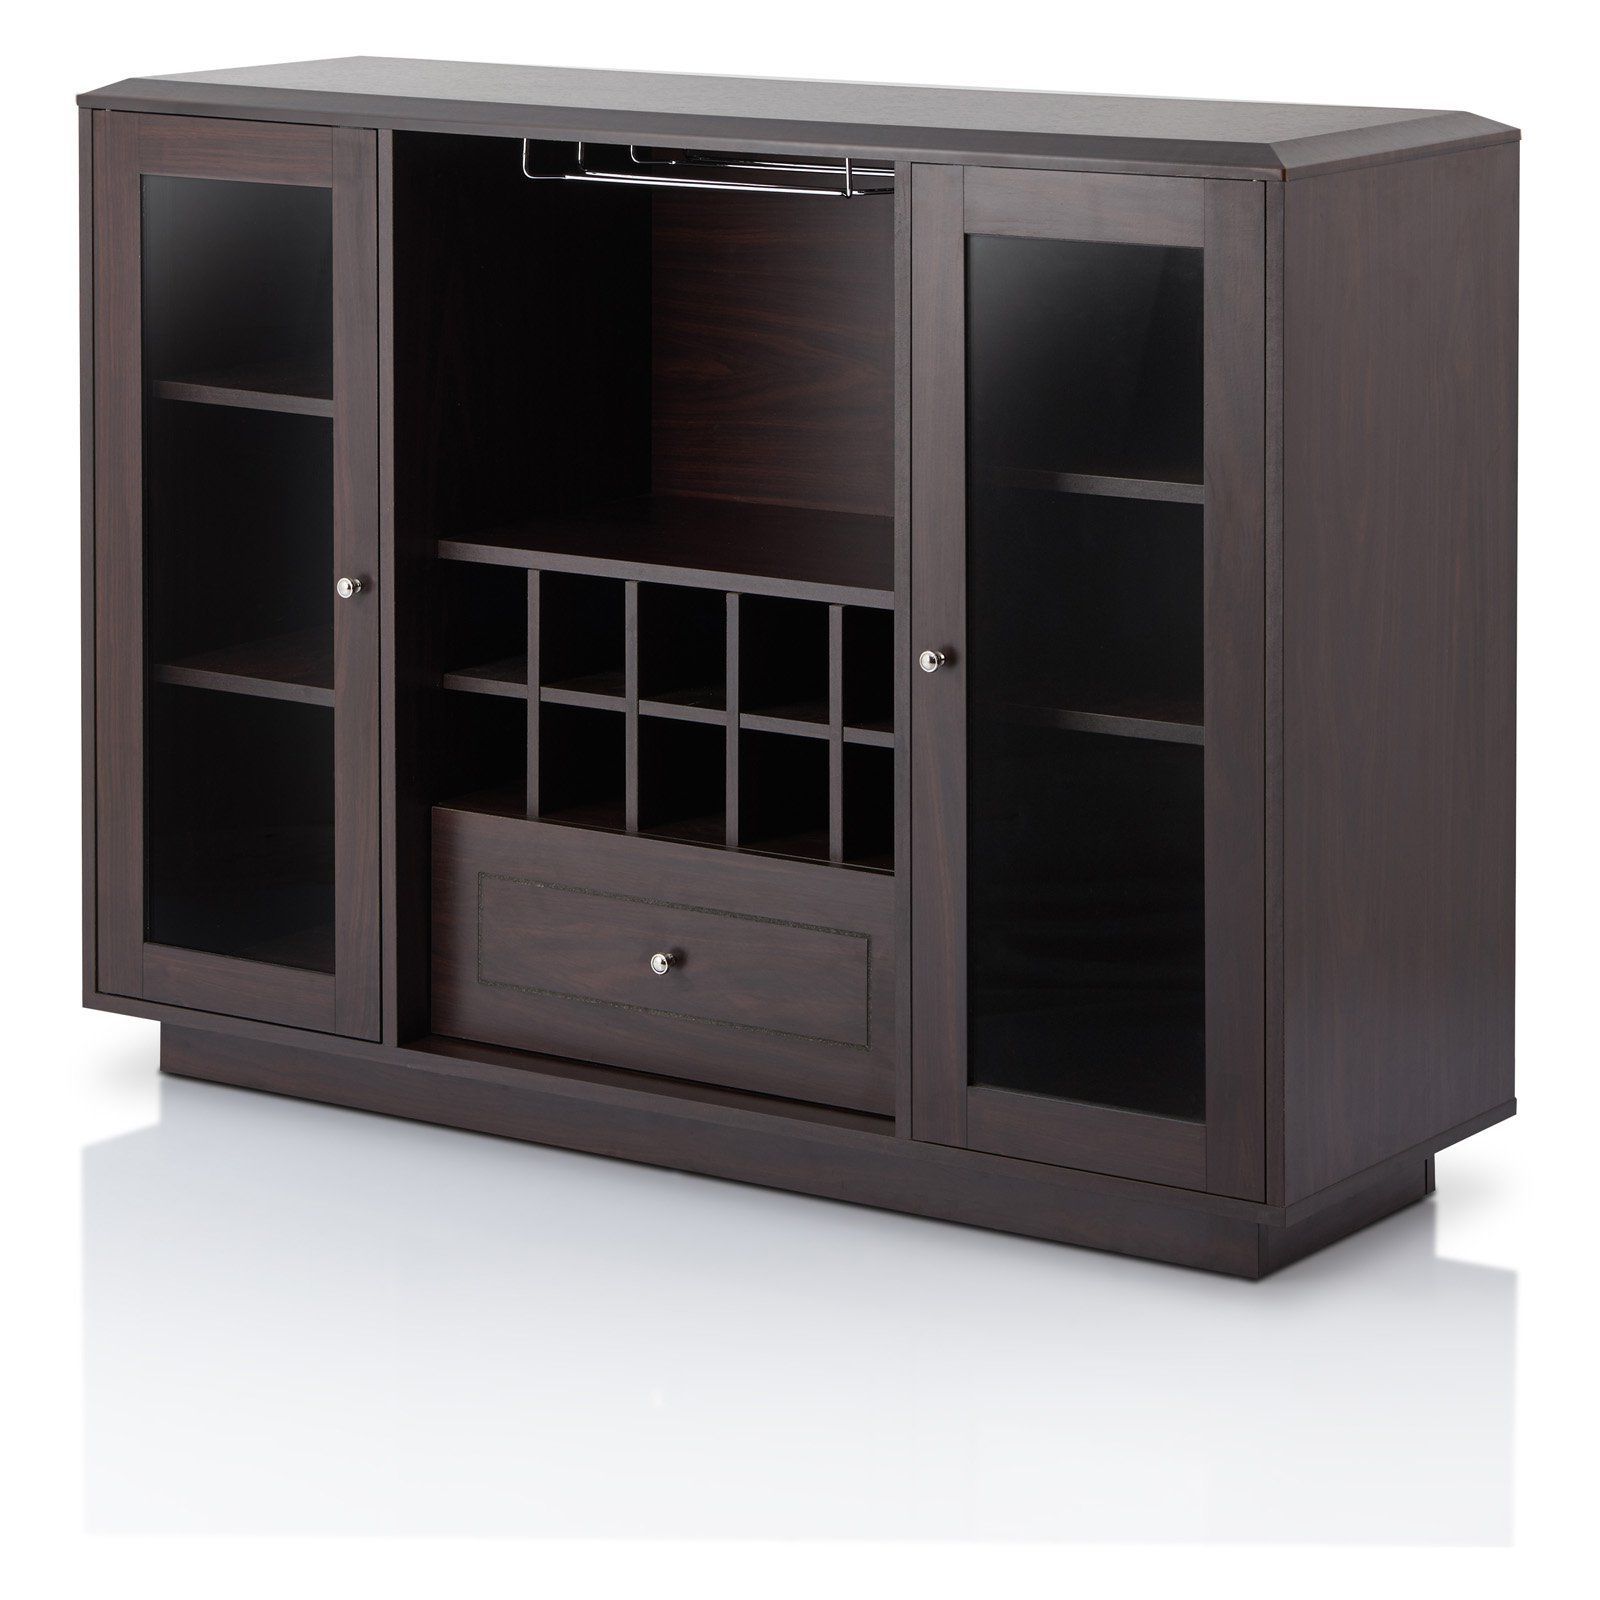 Furniture Of America Kenna Espresso Contemporary Multi With Regard To Contemporary Multi Storage Dining Buffets (View 1 of 20)